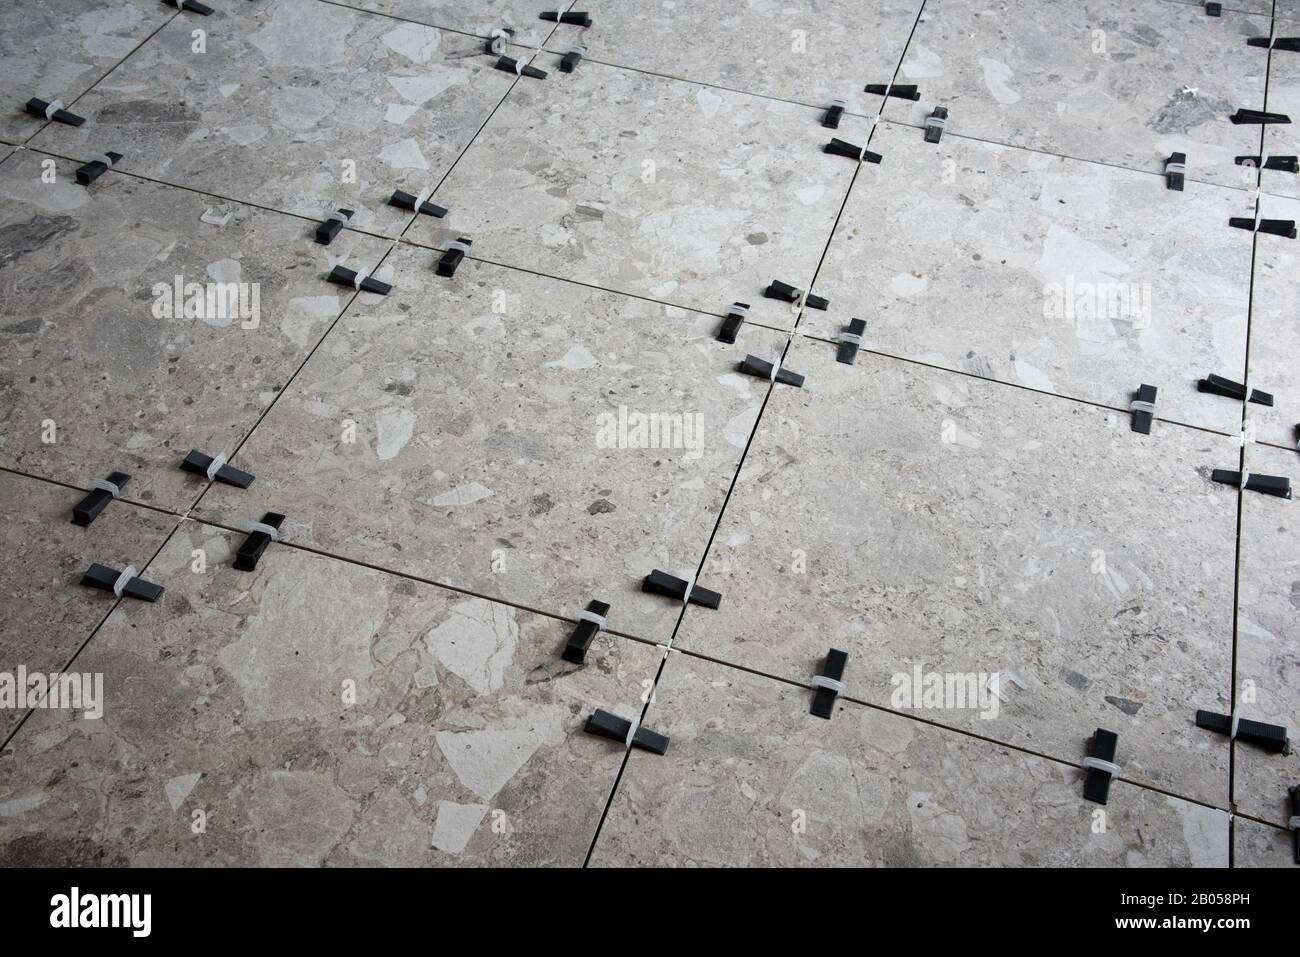 Plastic wedges and clips used for leveling ceramic tiles during installation of a floor. Stock Photo